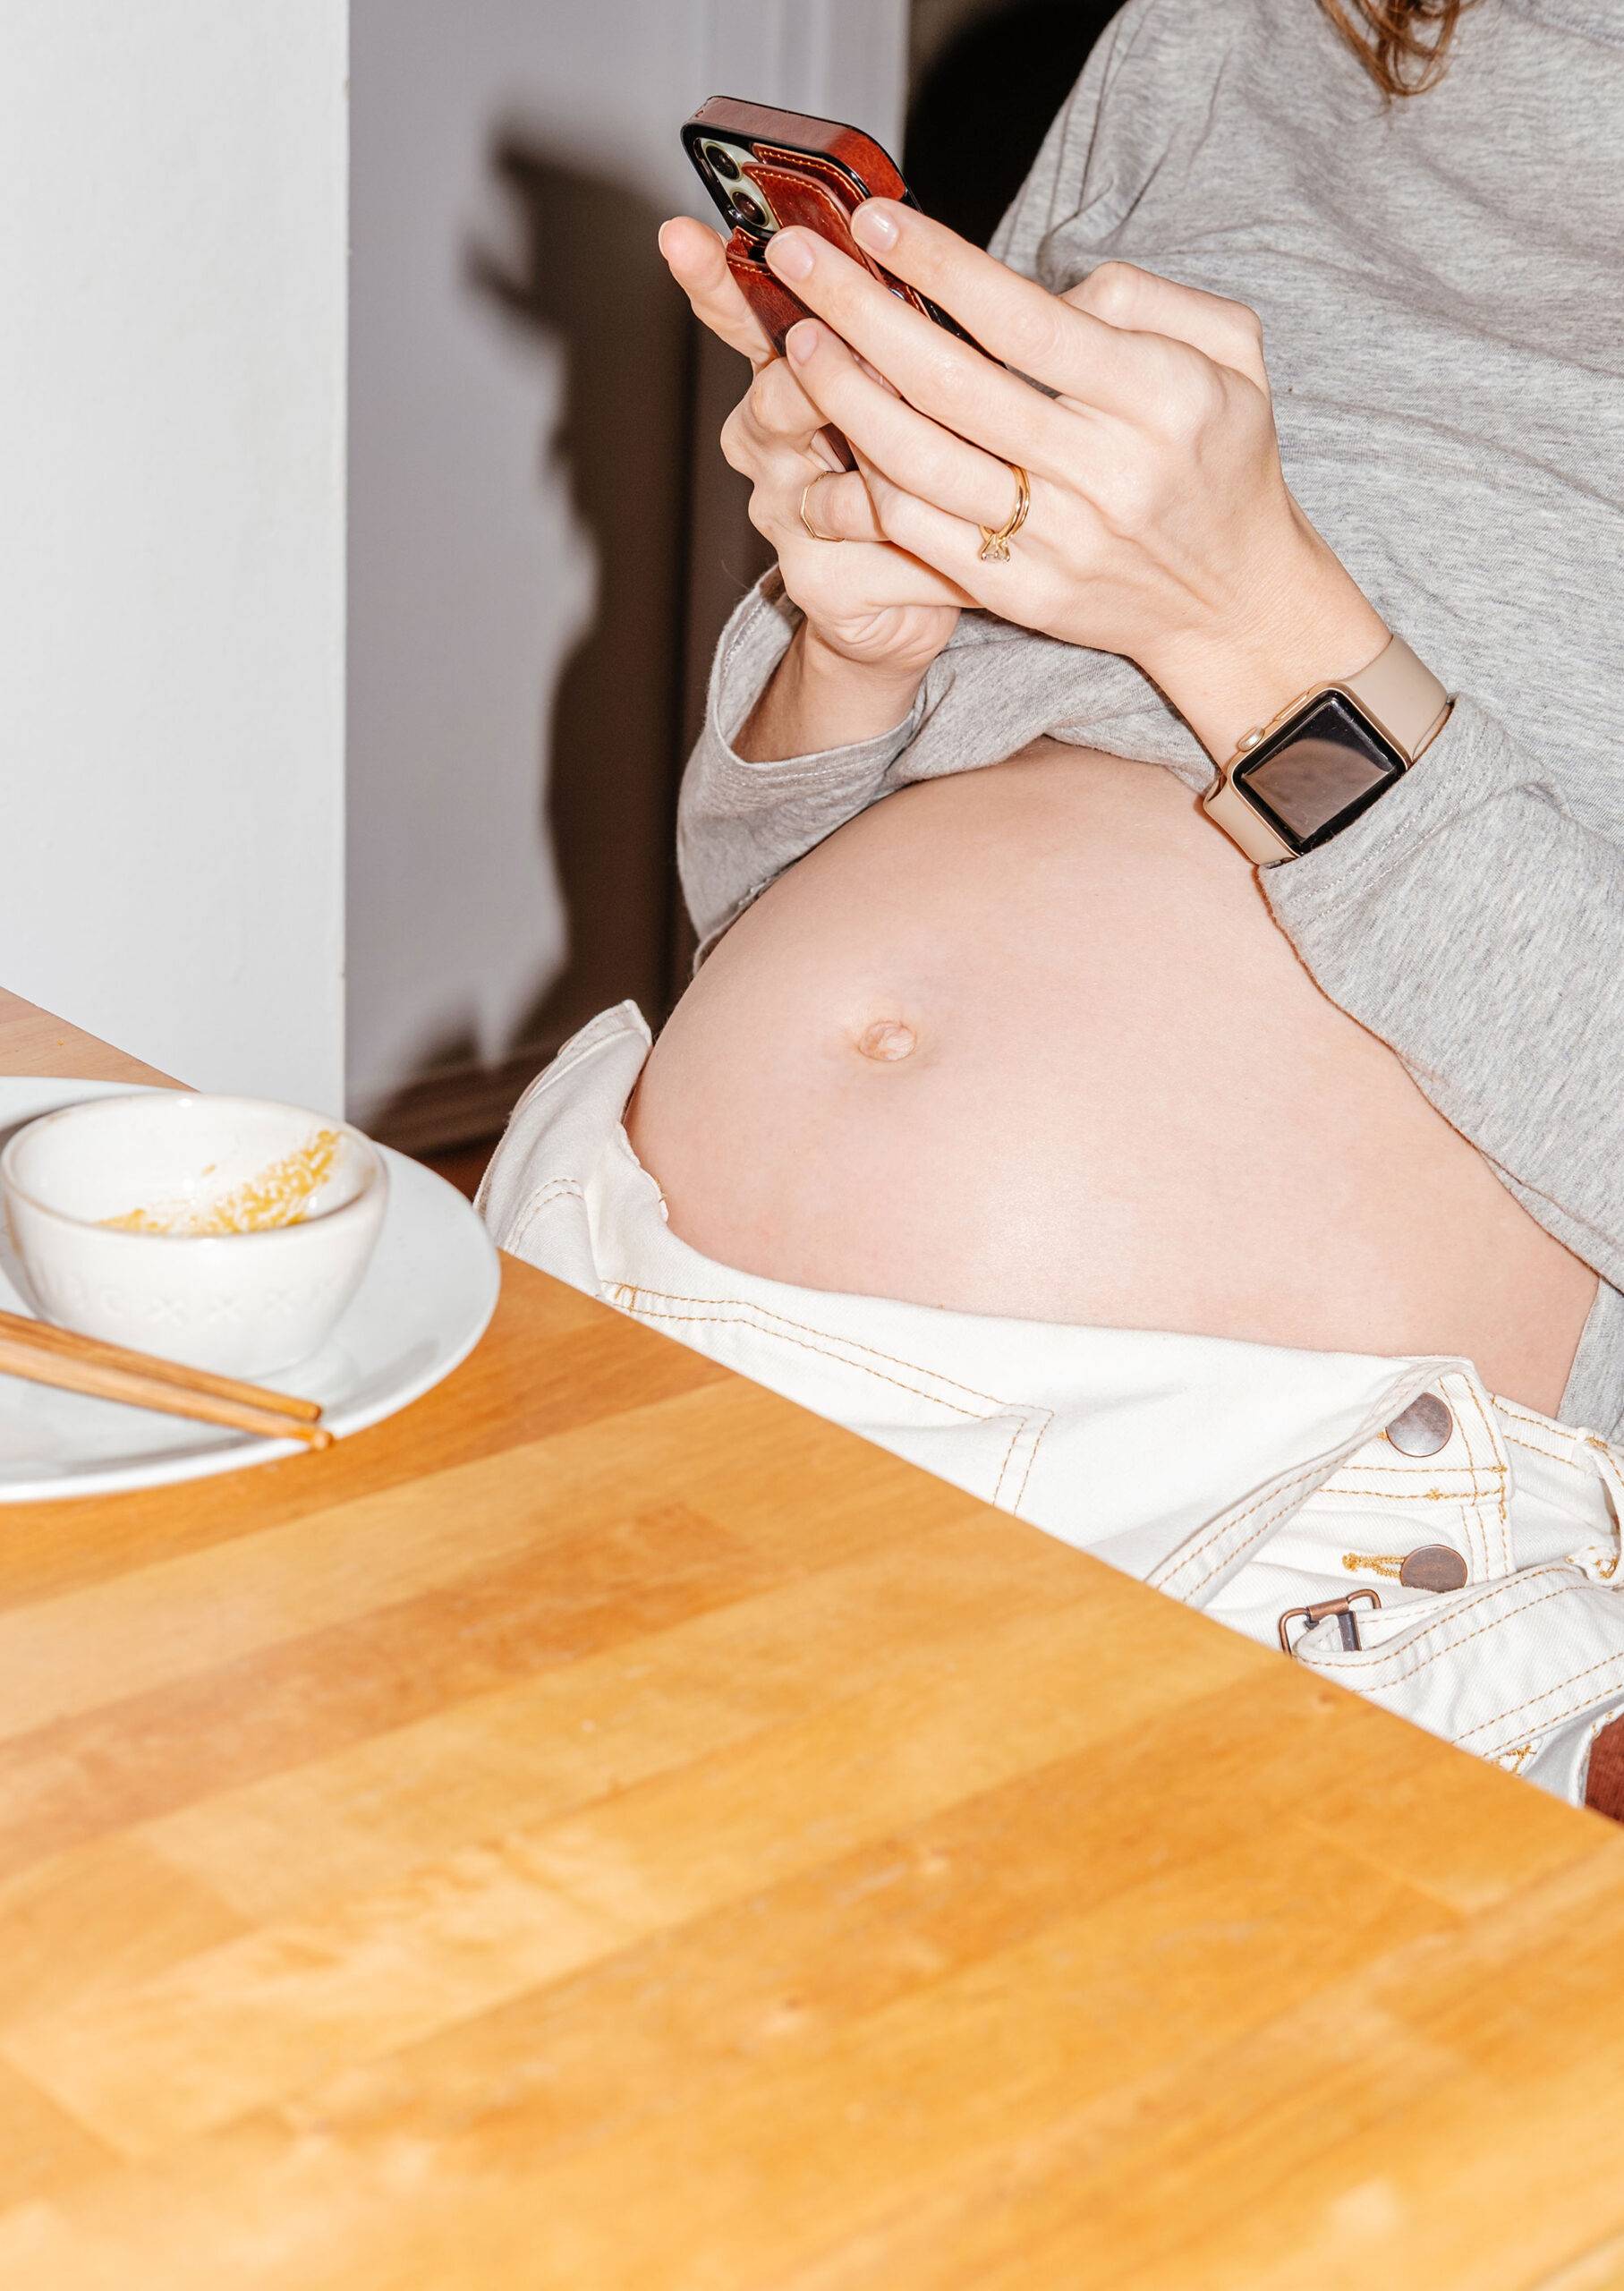 Pregnant woman sitting at a table with pregnant belly exposed after eating a meal. Expectant mother with a pregnancy belly.